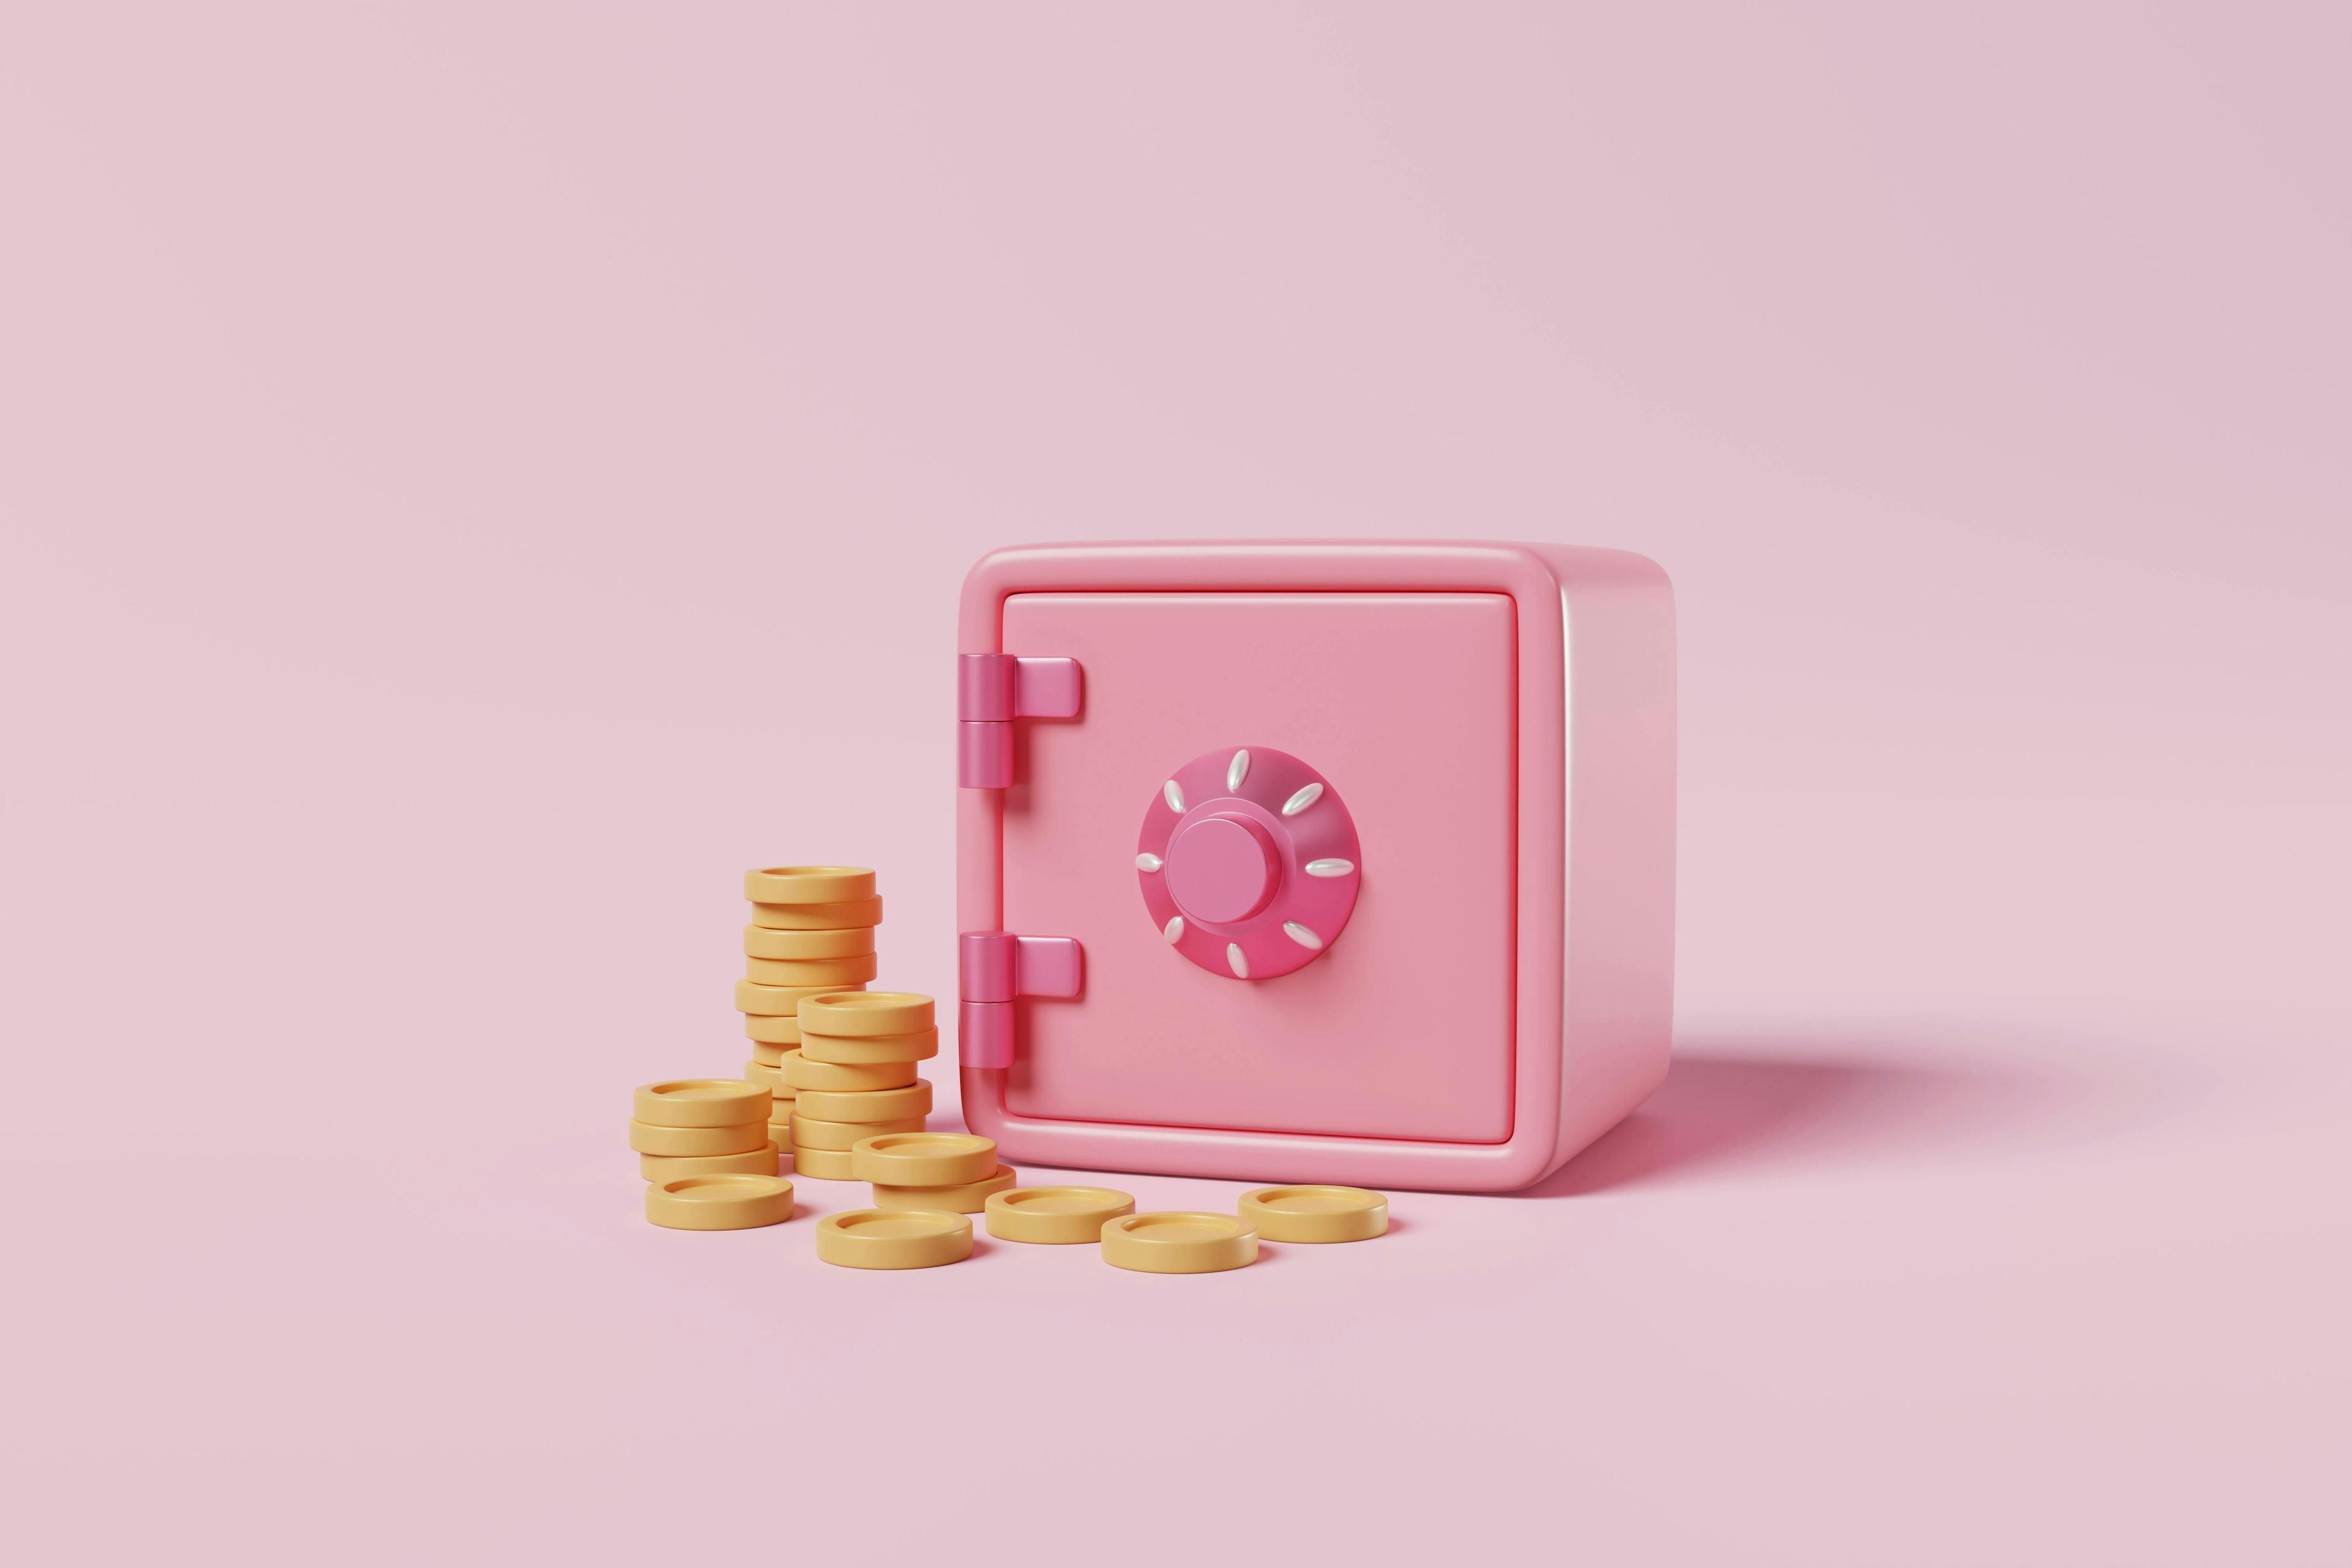 container,insurance,symbol,stack,secure,locker,3d,password,safety,lock,savings,cash,vault,strongbox,unlock,coins,metal,rendering,tax,system,background,safe,deposit,trust,pink,code,financial,concept,icon,privacy,box,protection,secret,storage,inflation,banking,dollar,gold,security,crime,key,dial,wealth,business,rich,money,fund,illustration,account,open